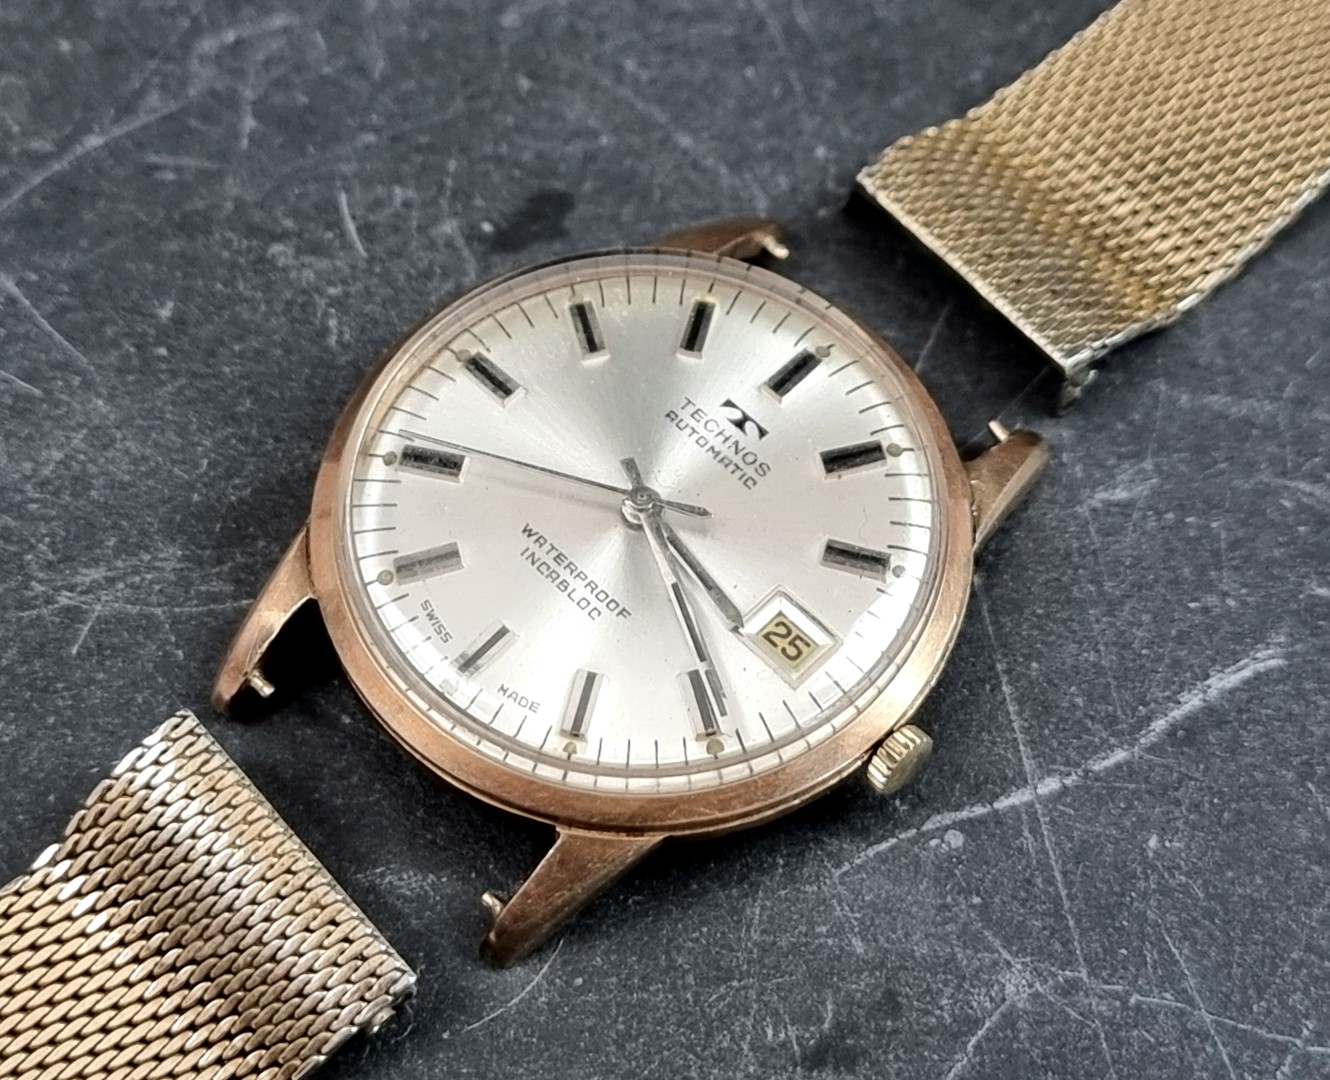 A Technos 9ct gold automatic wristwatch, 34mm, Ref. 3003, import mark Edinburgh 1965, with later